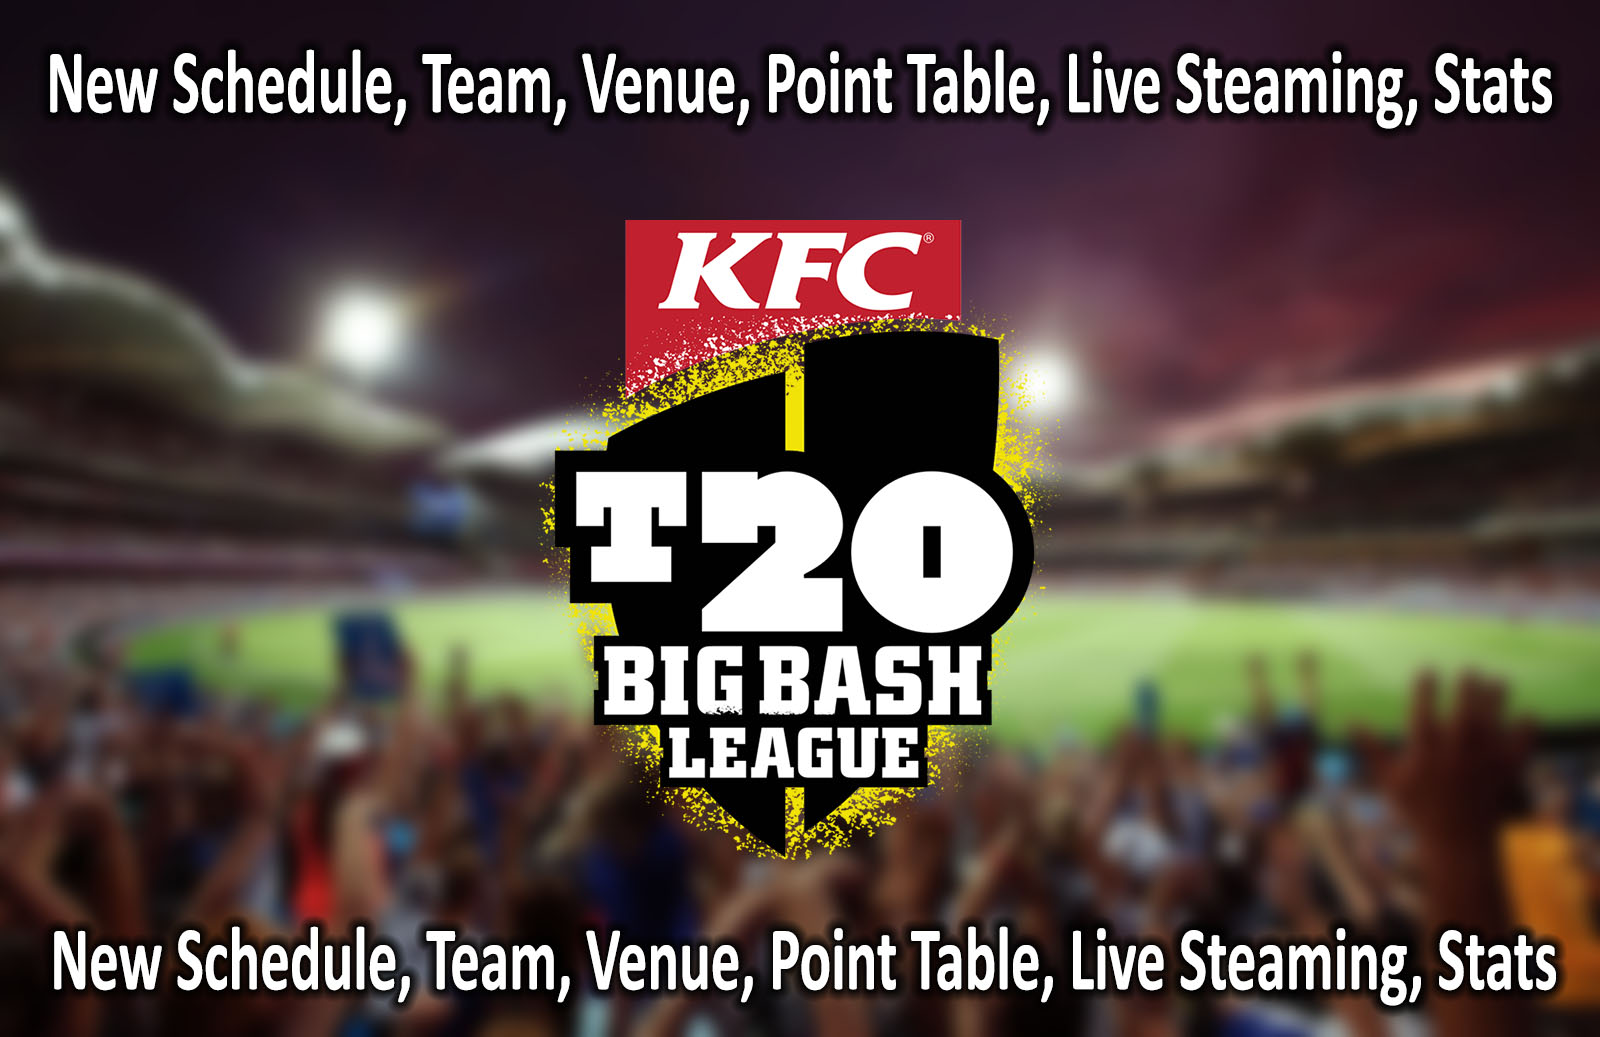 Big Bash League 2020-21 Schedule, Team, Venue, Point Table, Standing, Results, Live Streaming, Stats, Records